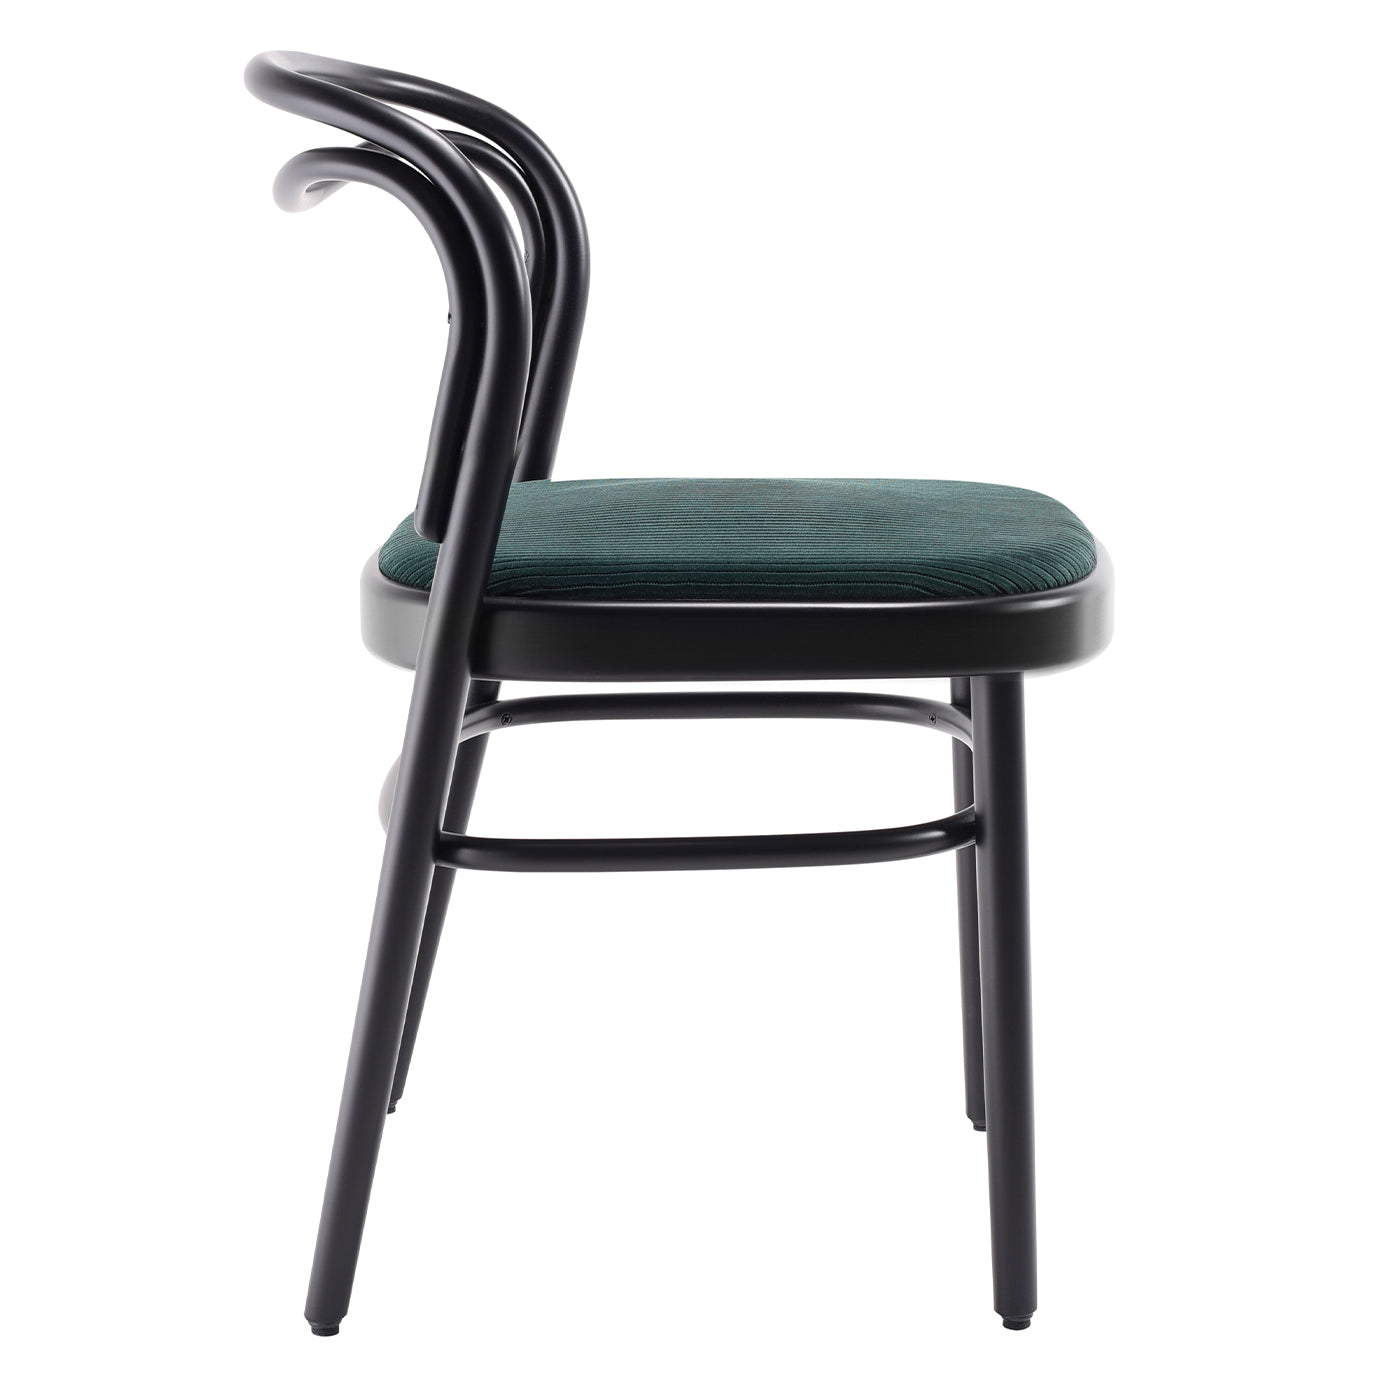 BEAULIEU chair with upholstered seat by PHILIPPE NIGRO - Alternative view 3